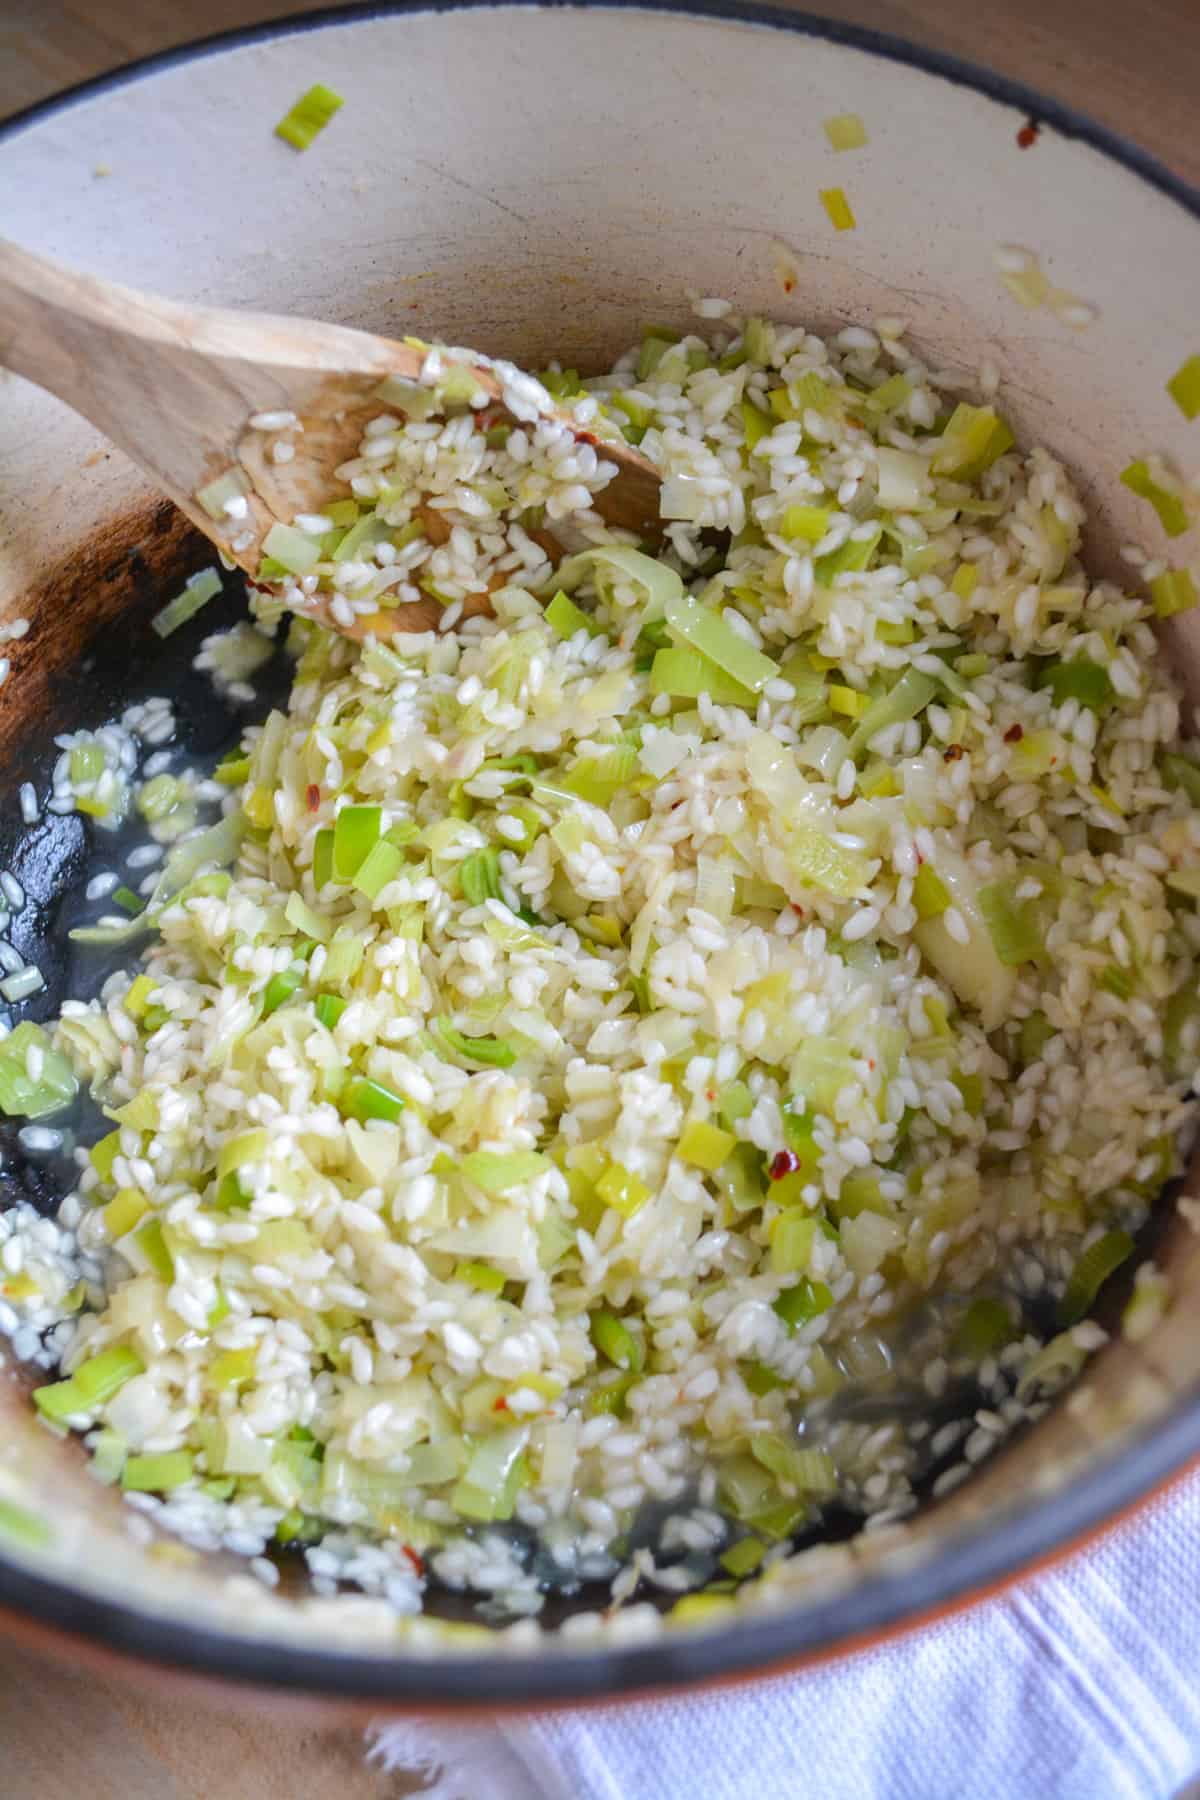 White wine added into the risotto in a large pot.